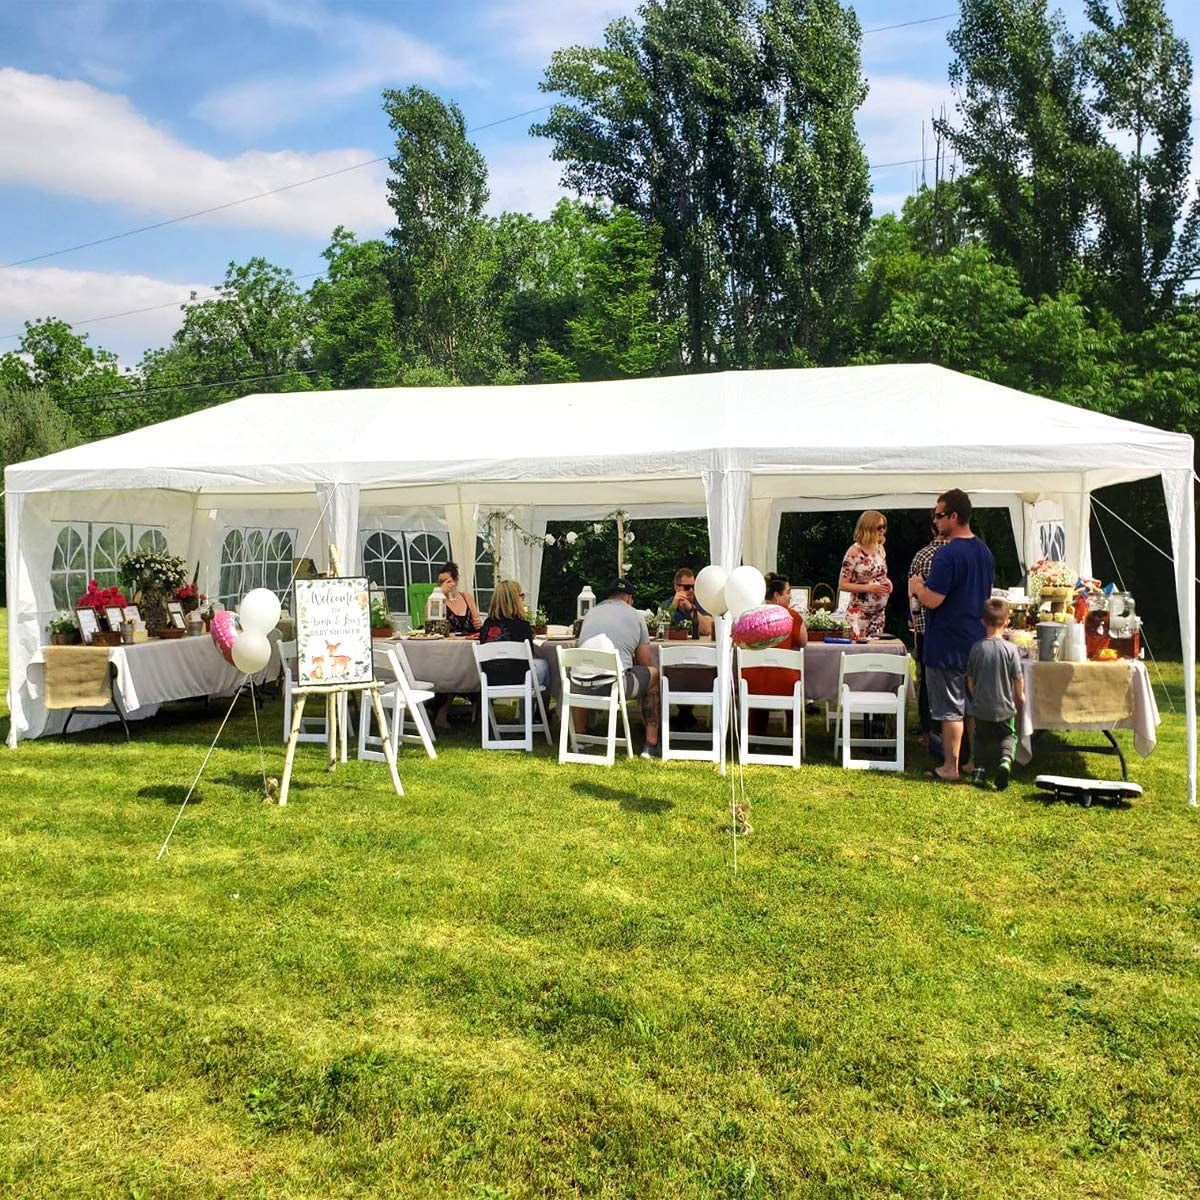 Need Shade for Your Big Outdoor Event. Discover Why A 15x30 Party Tent Is Your Best Bet